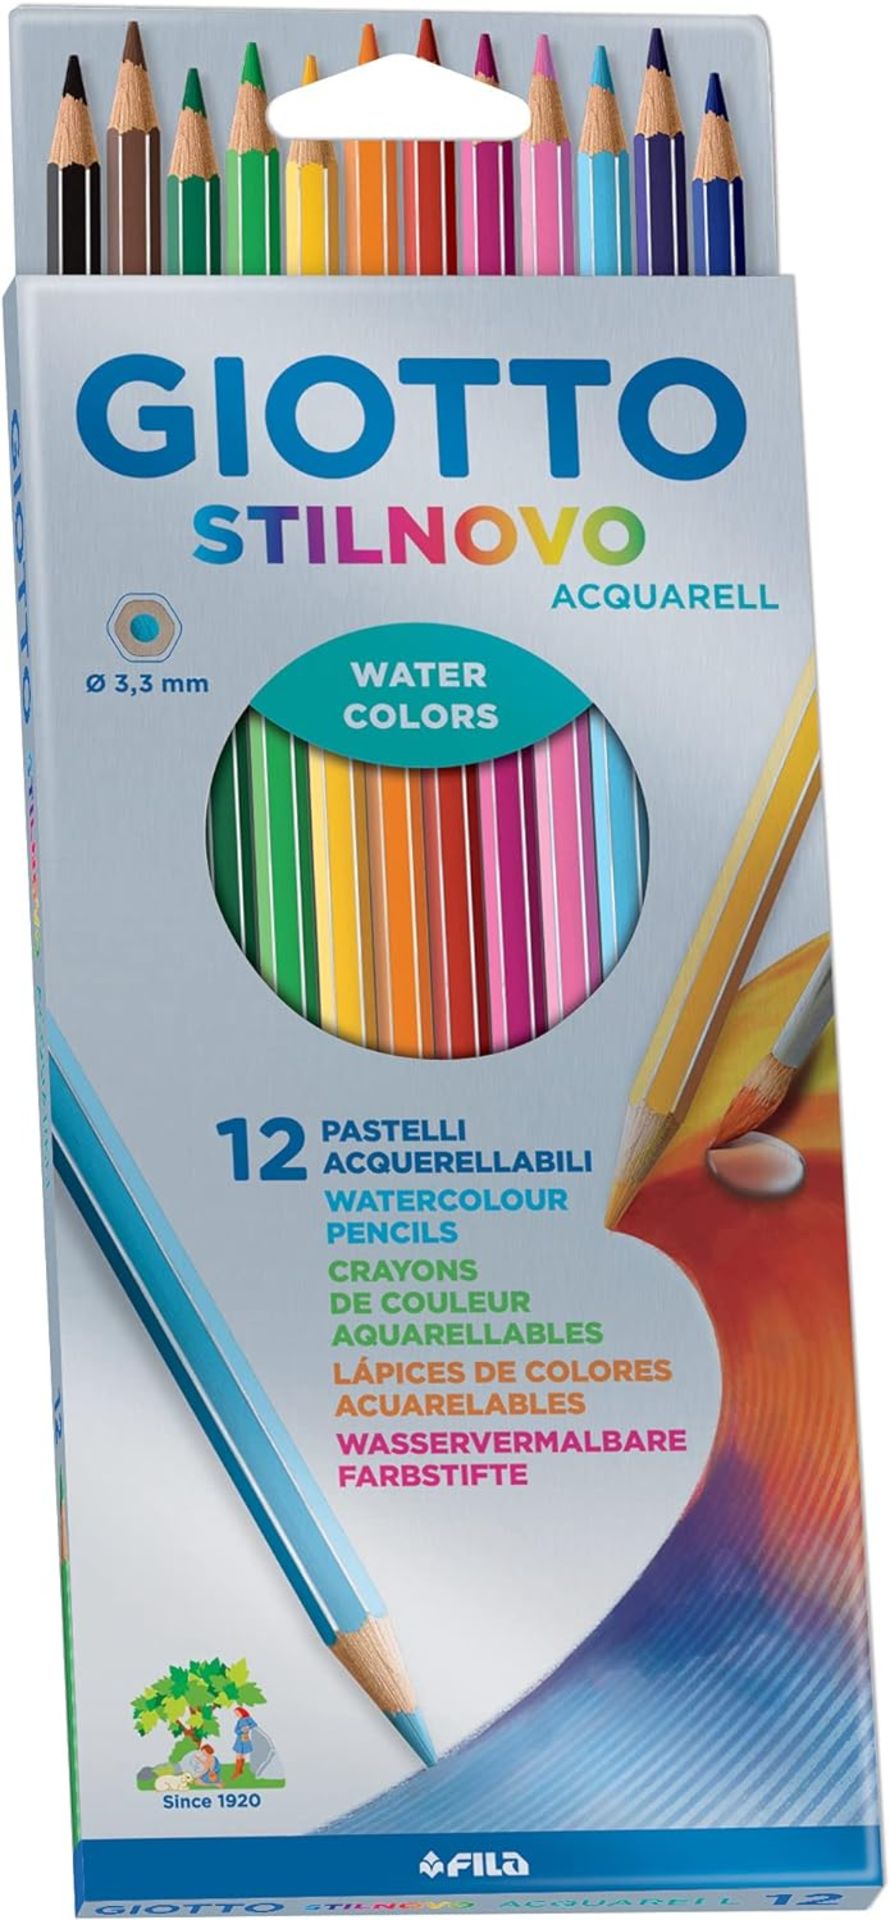 8 X BRAND NEW PACKS OF 12 GIOTTO STILLNOVO WATER COLOUR PENCILS R4-8